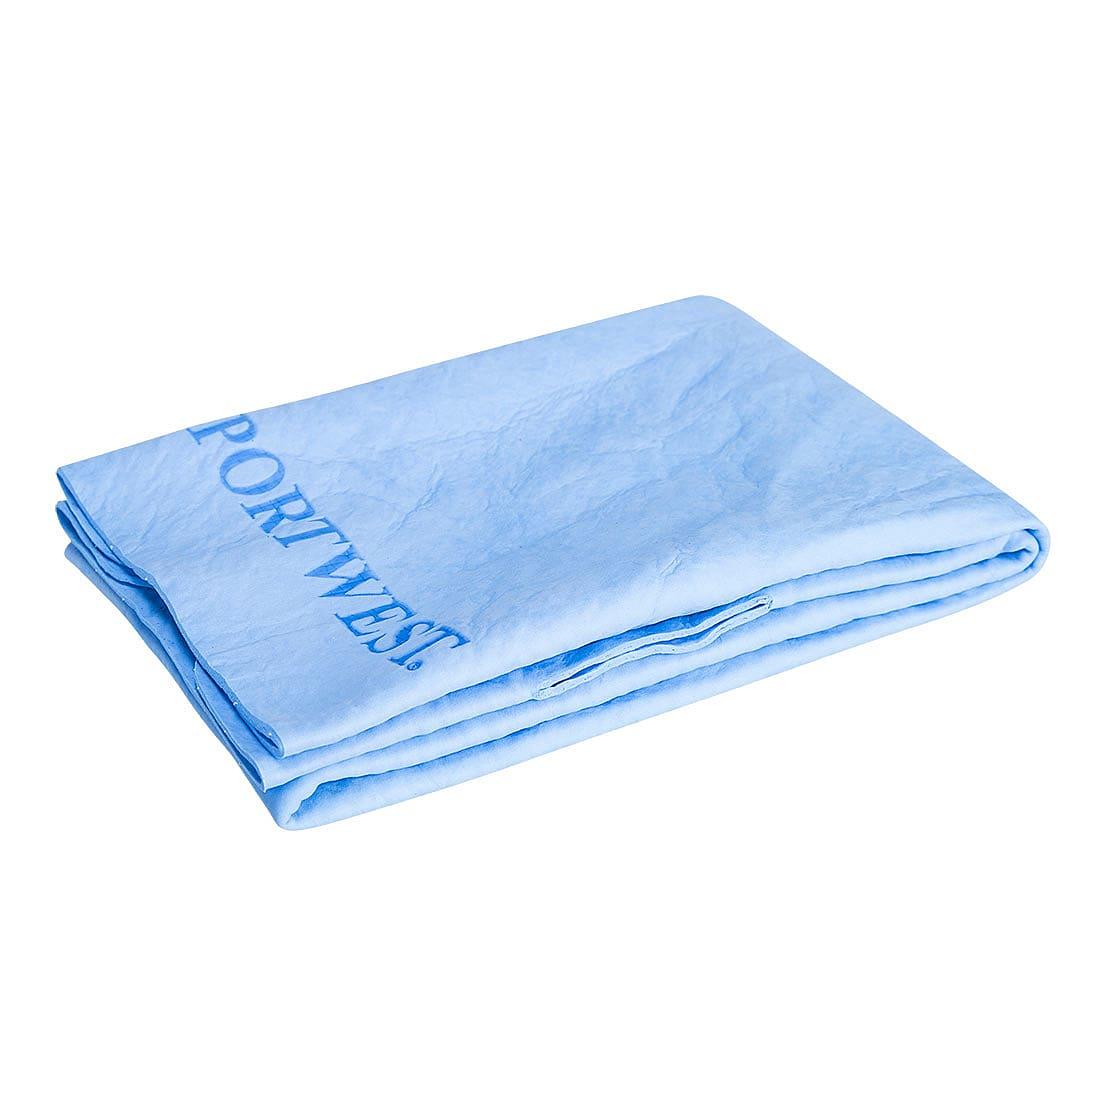 Portwest Cooling Towel in Blue (Product Code: CV06)